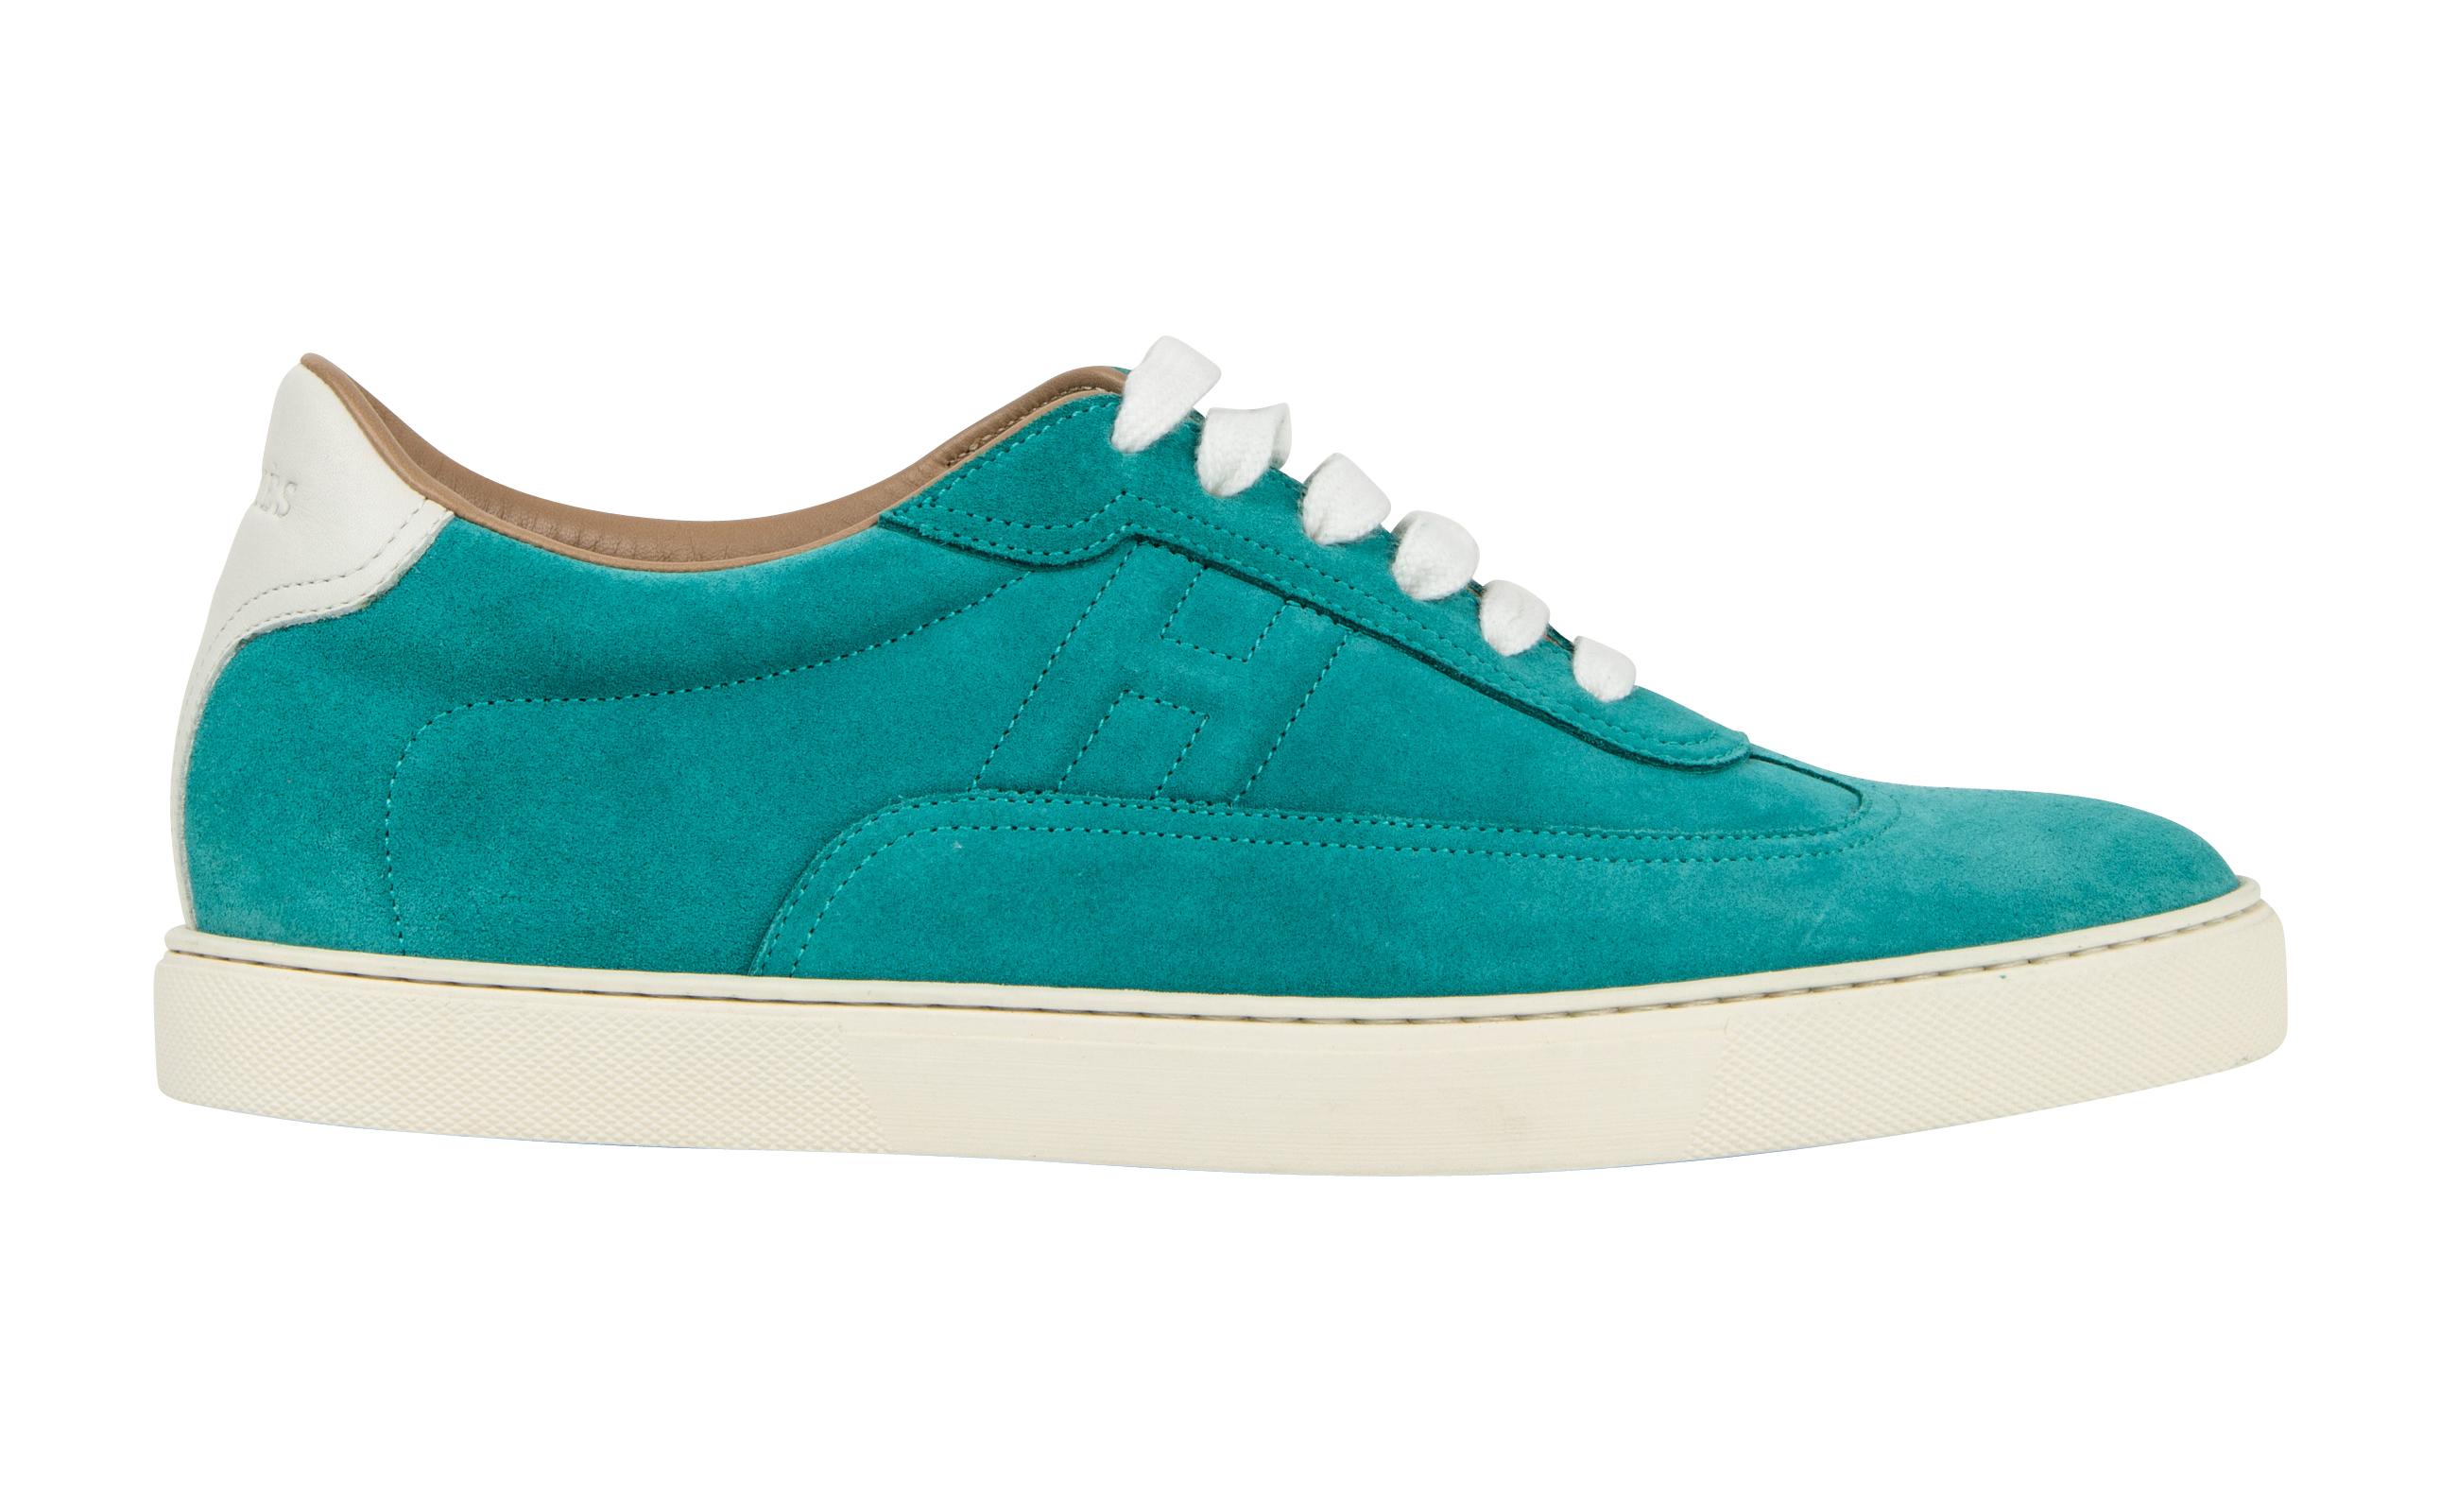 Guaranteed authentic Hermes men's suede sneaker. 
Hermes Blue Paon colour with white rear leather embossed Hermes.
Subtle H on sides.
Comes with sleepers.
NEW or NEVER WORN  


SIZE  42.5

CONDITION: 
NEW or NEVER WORN
